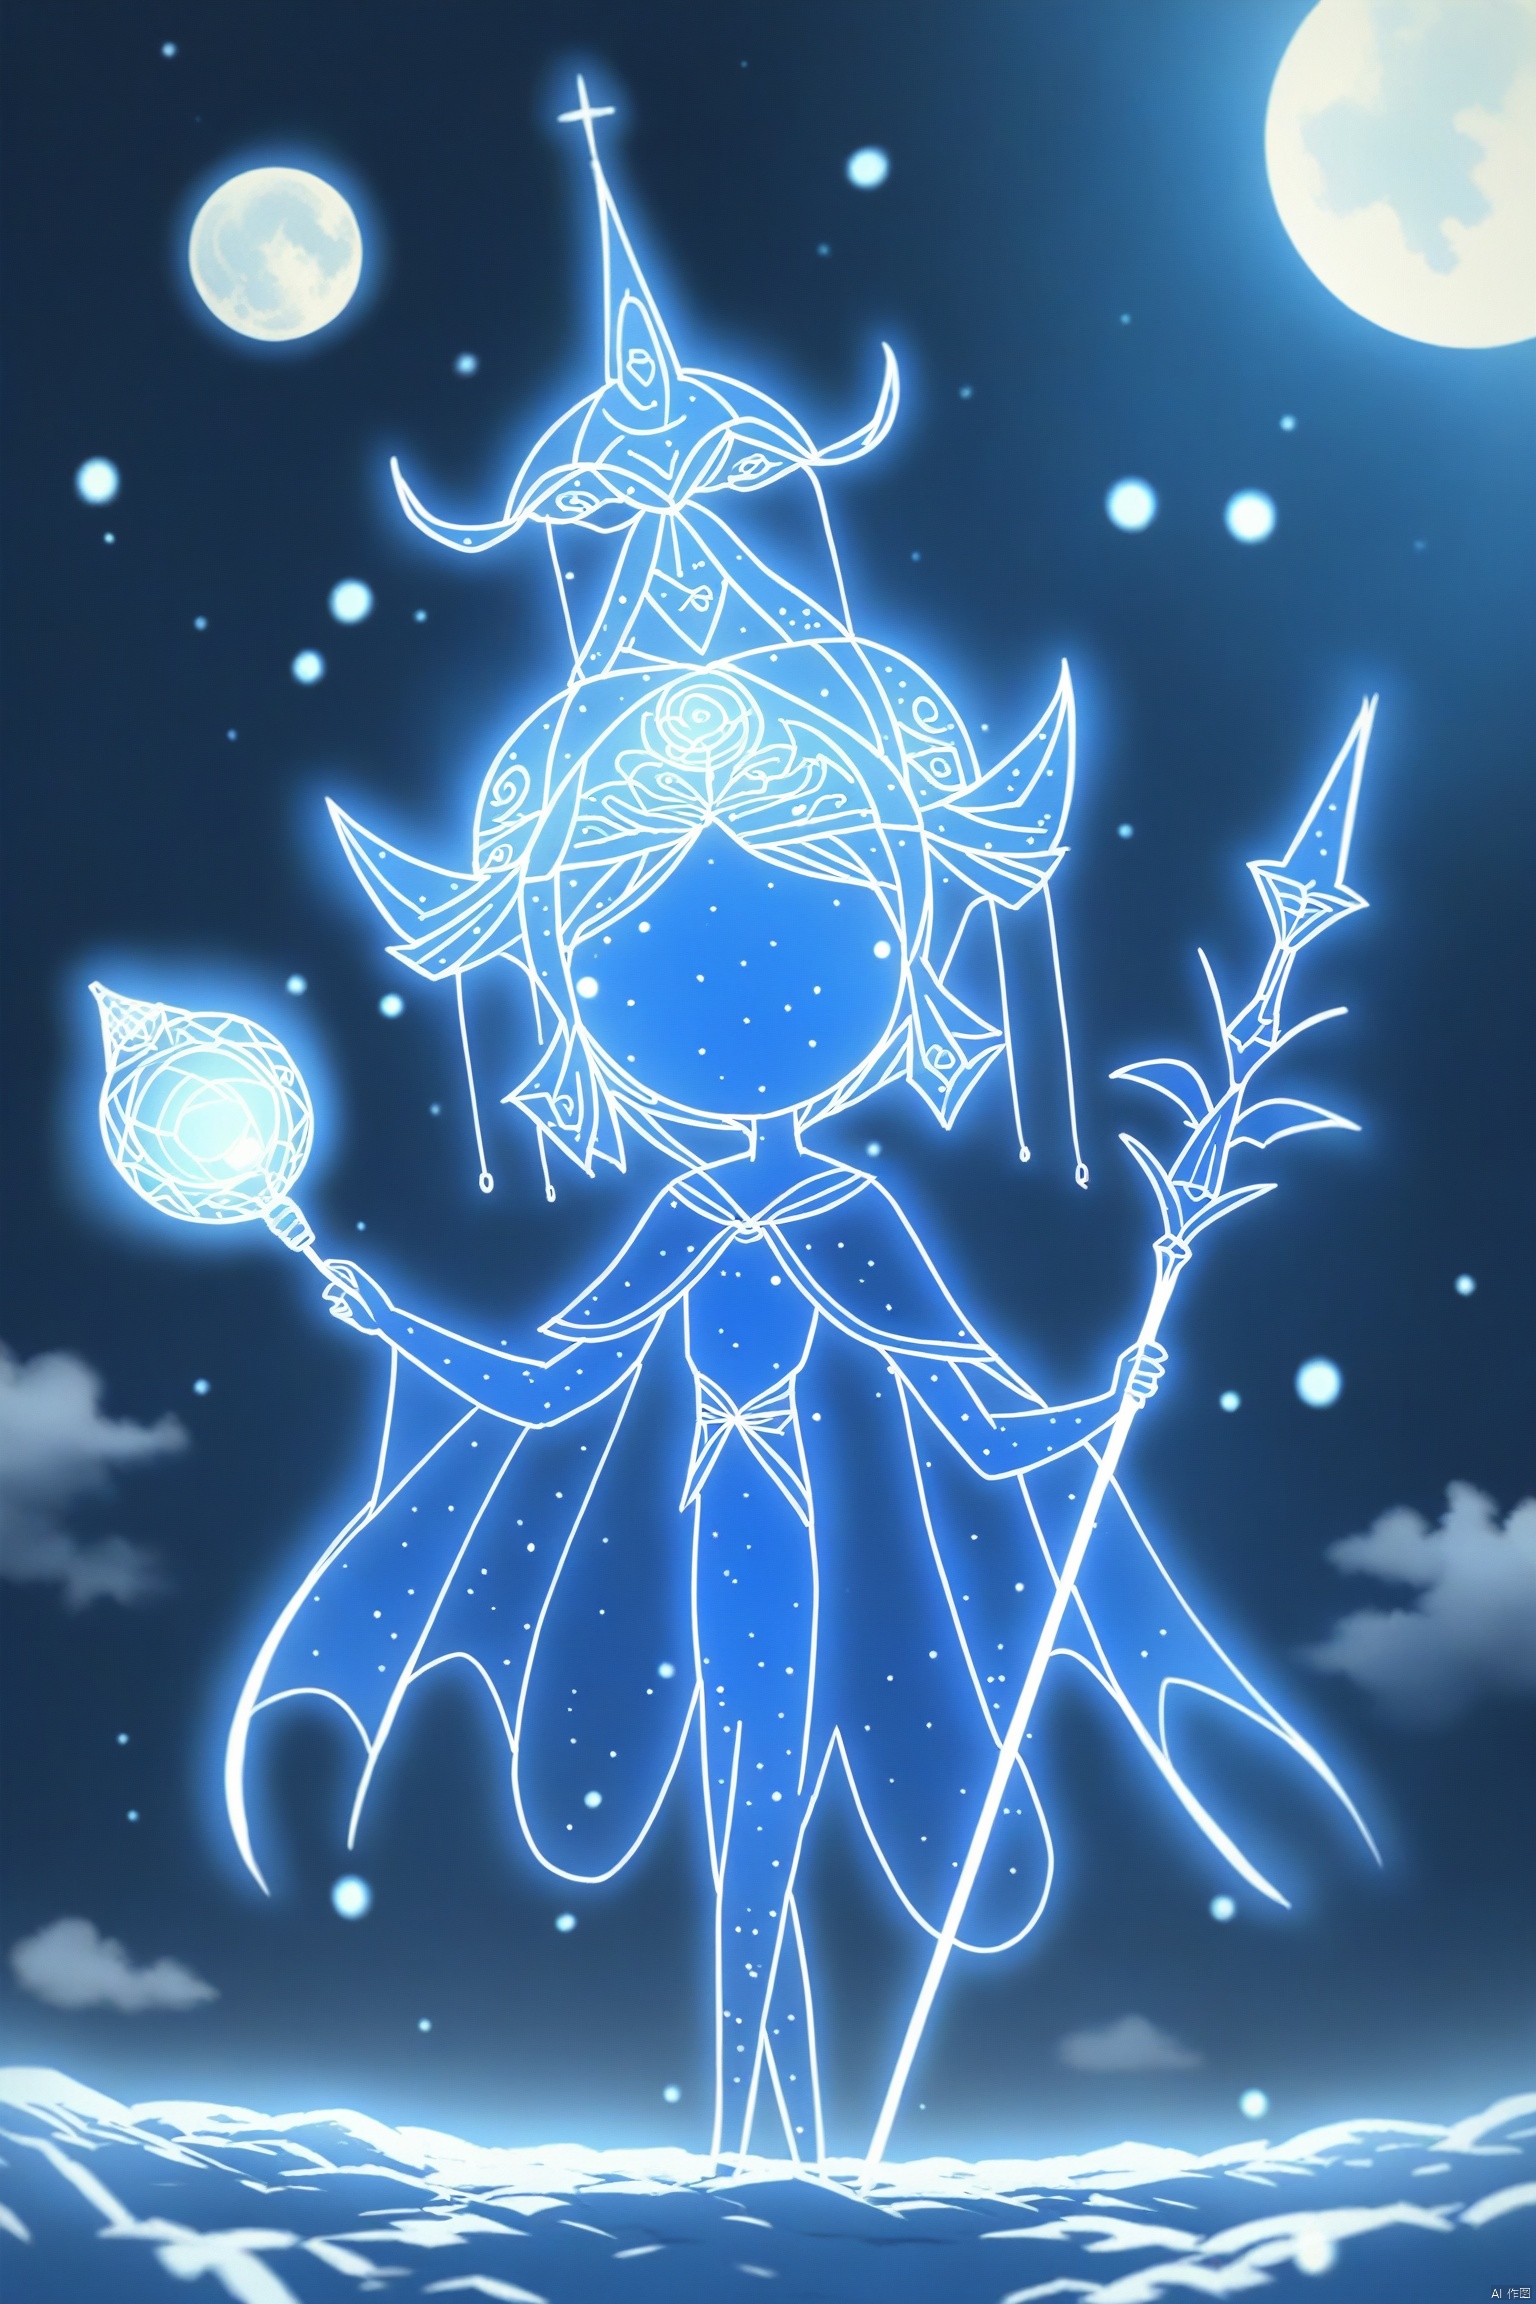  Highly detailed Powerfull blue god holding a staff in the 5th, detailed face, detailed body, dimension, very colorfull, highly detailed, the enviroment is a dreamy palace in the clouds with the night sky full of stars